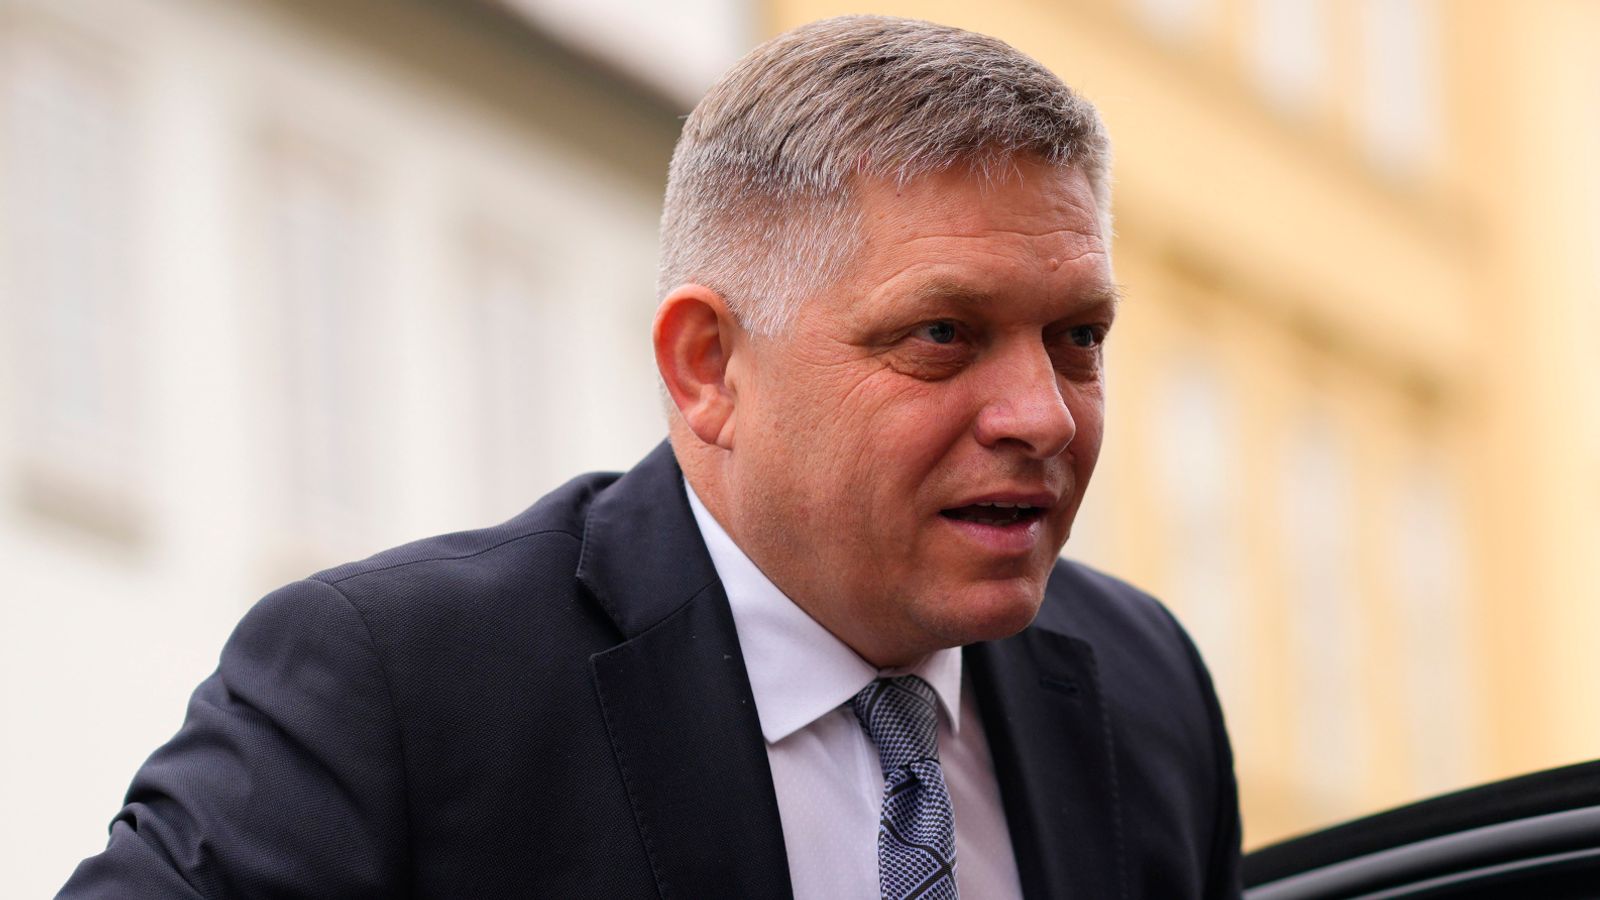 Suspect in assassination attempt on Slovak PM may not have been 'lone wolf', minister says